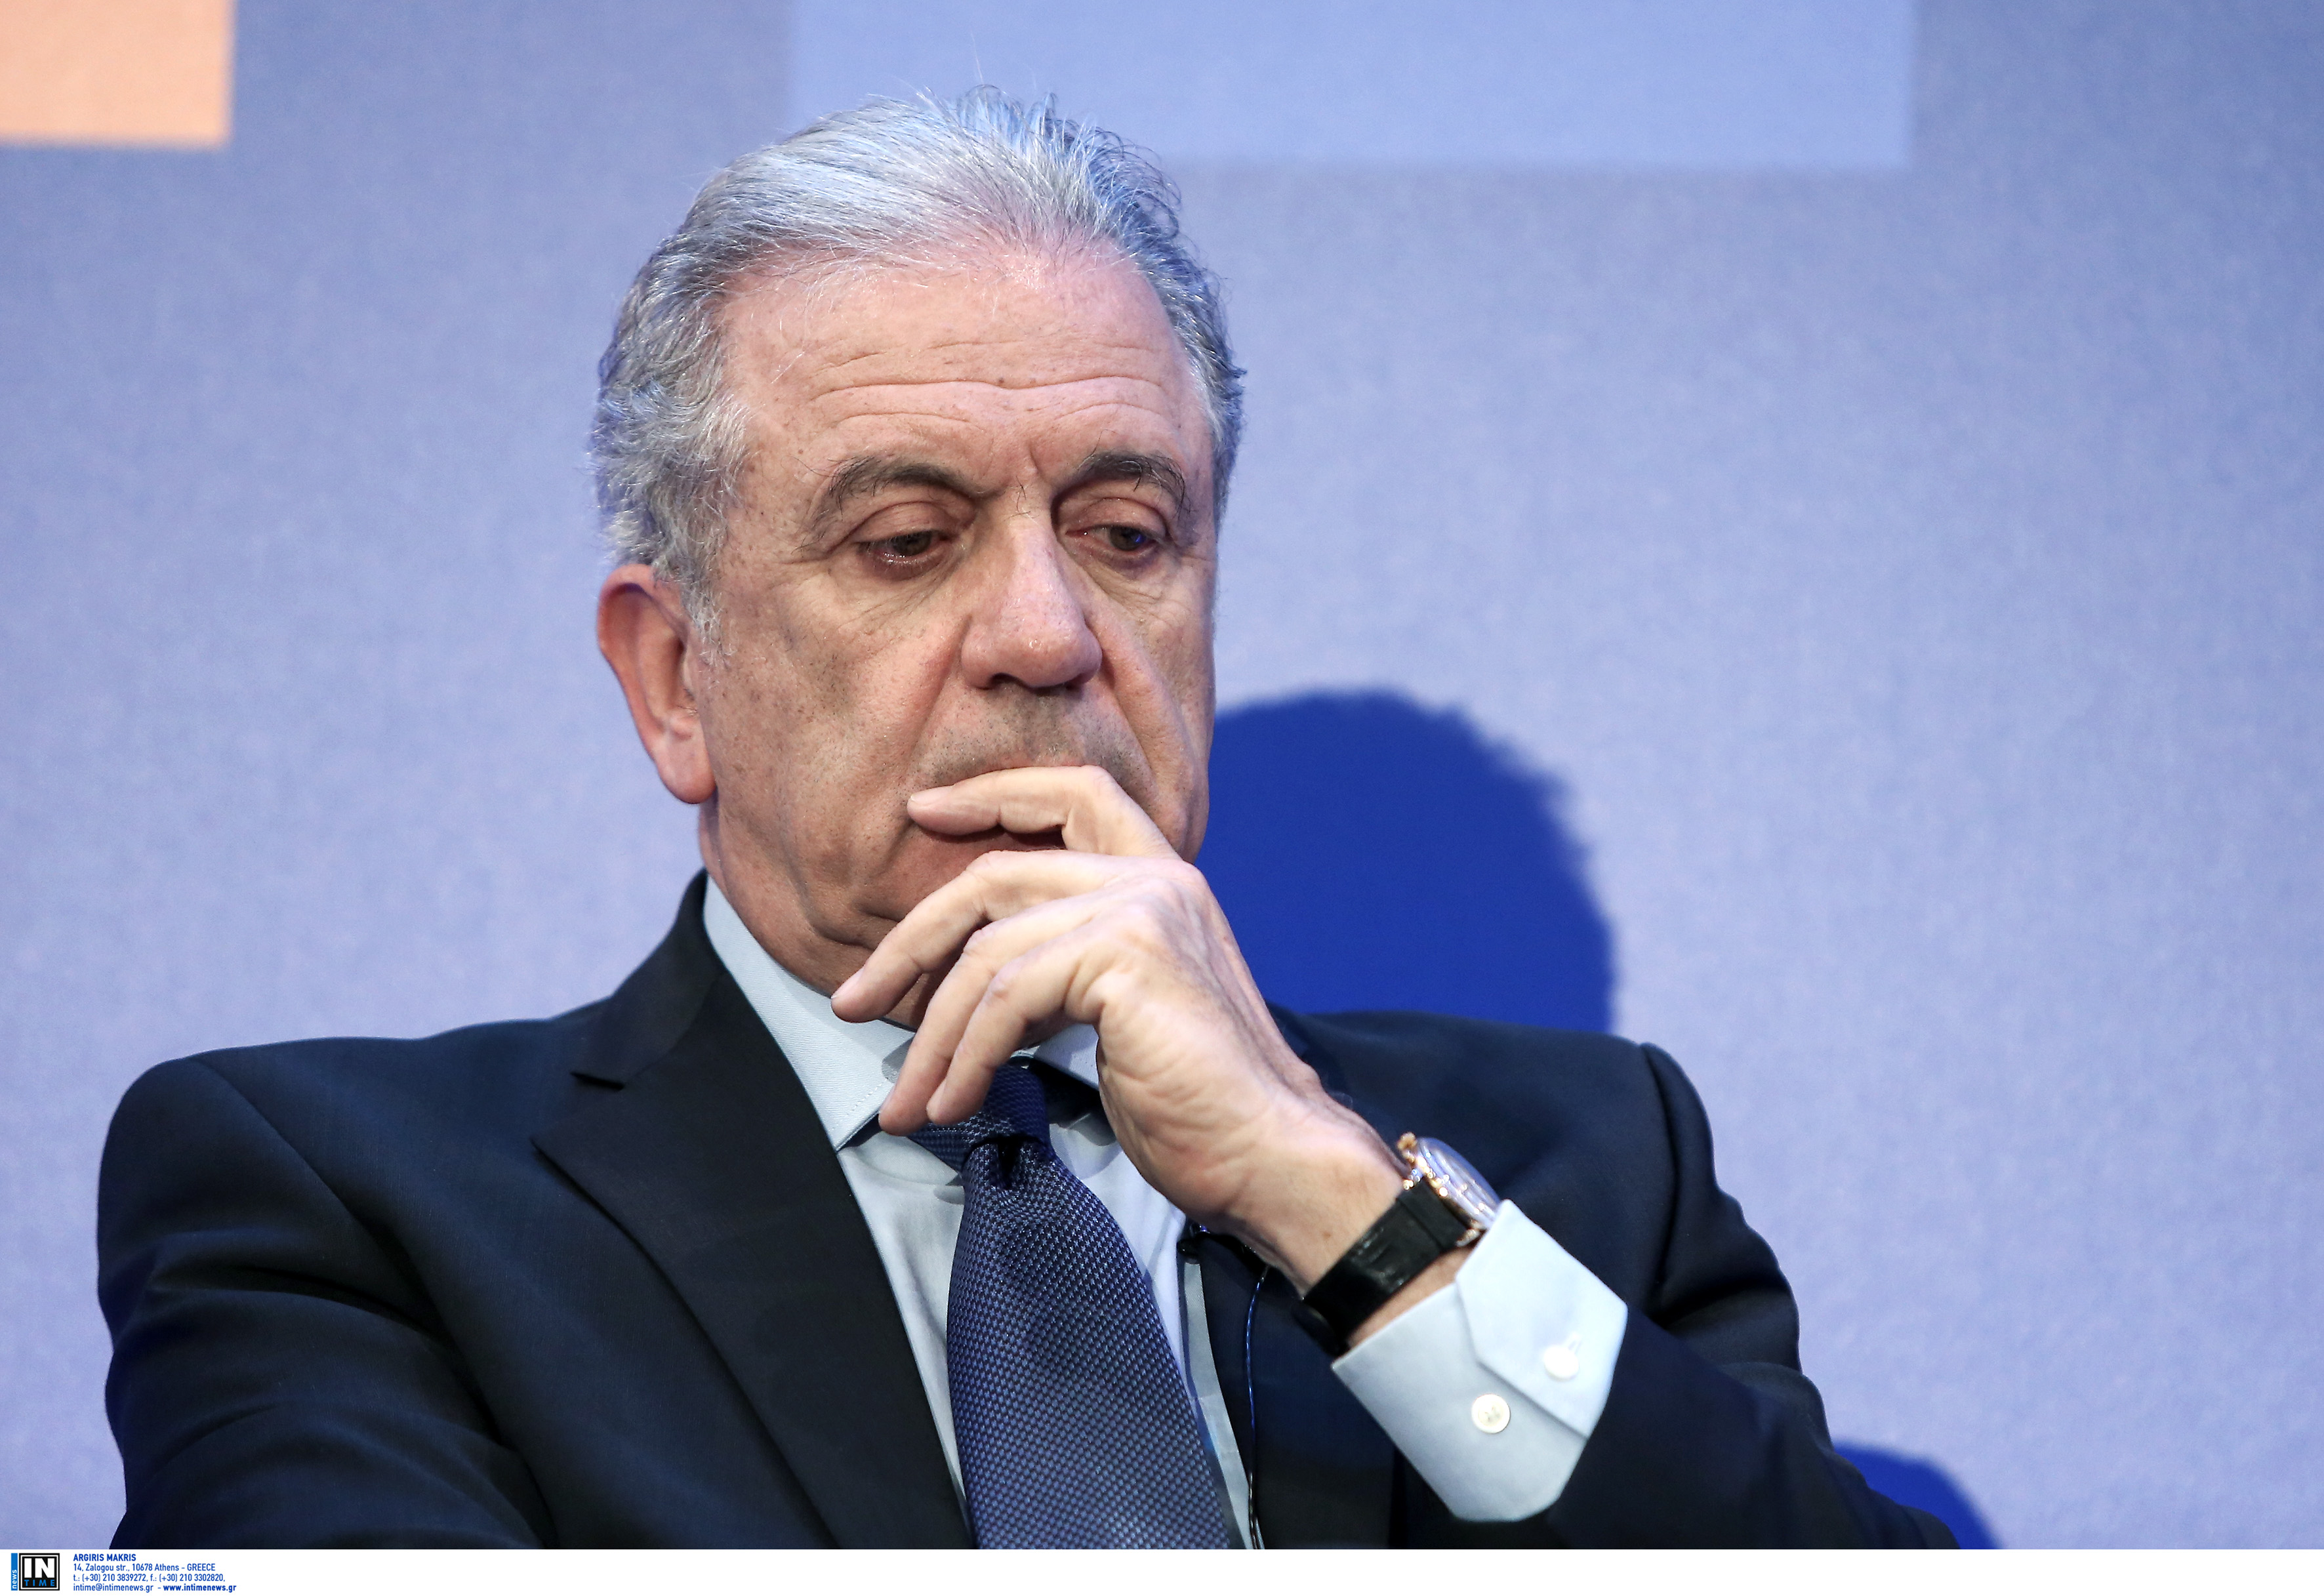 Avramopoulos: “Mindless violence is difficult to confront”